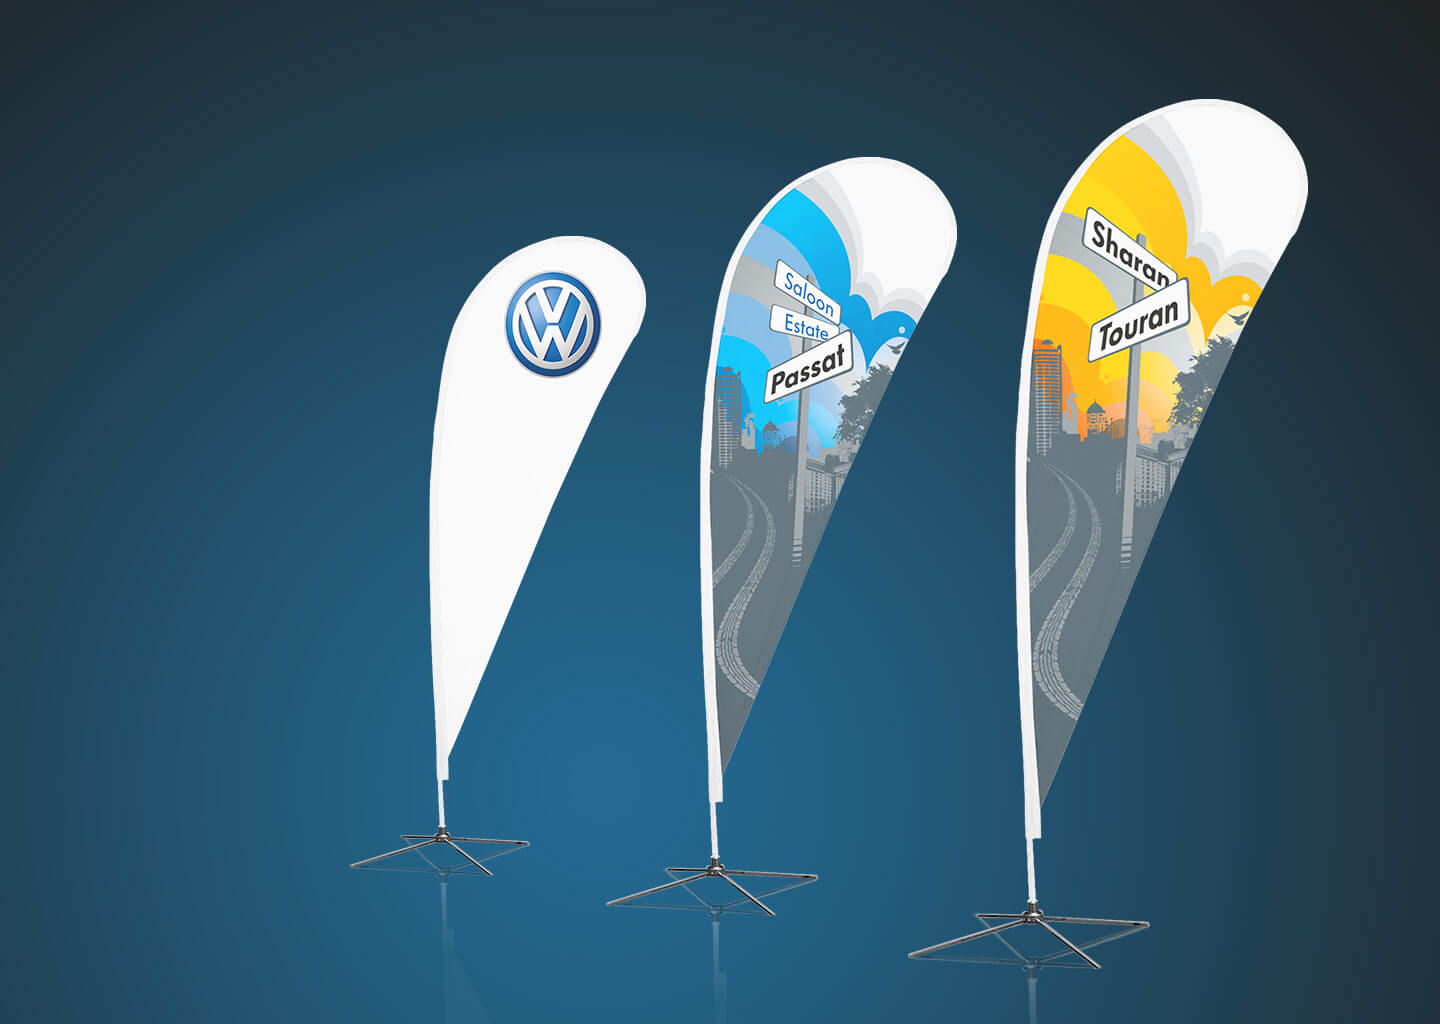 Creative event design for a Volkswagen launch